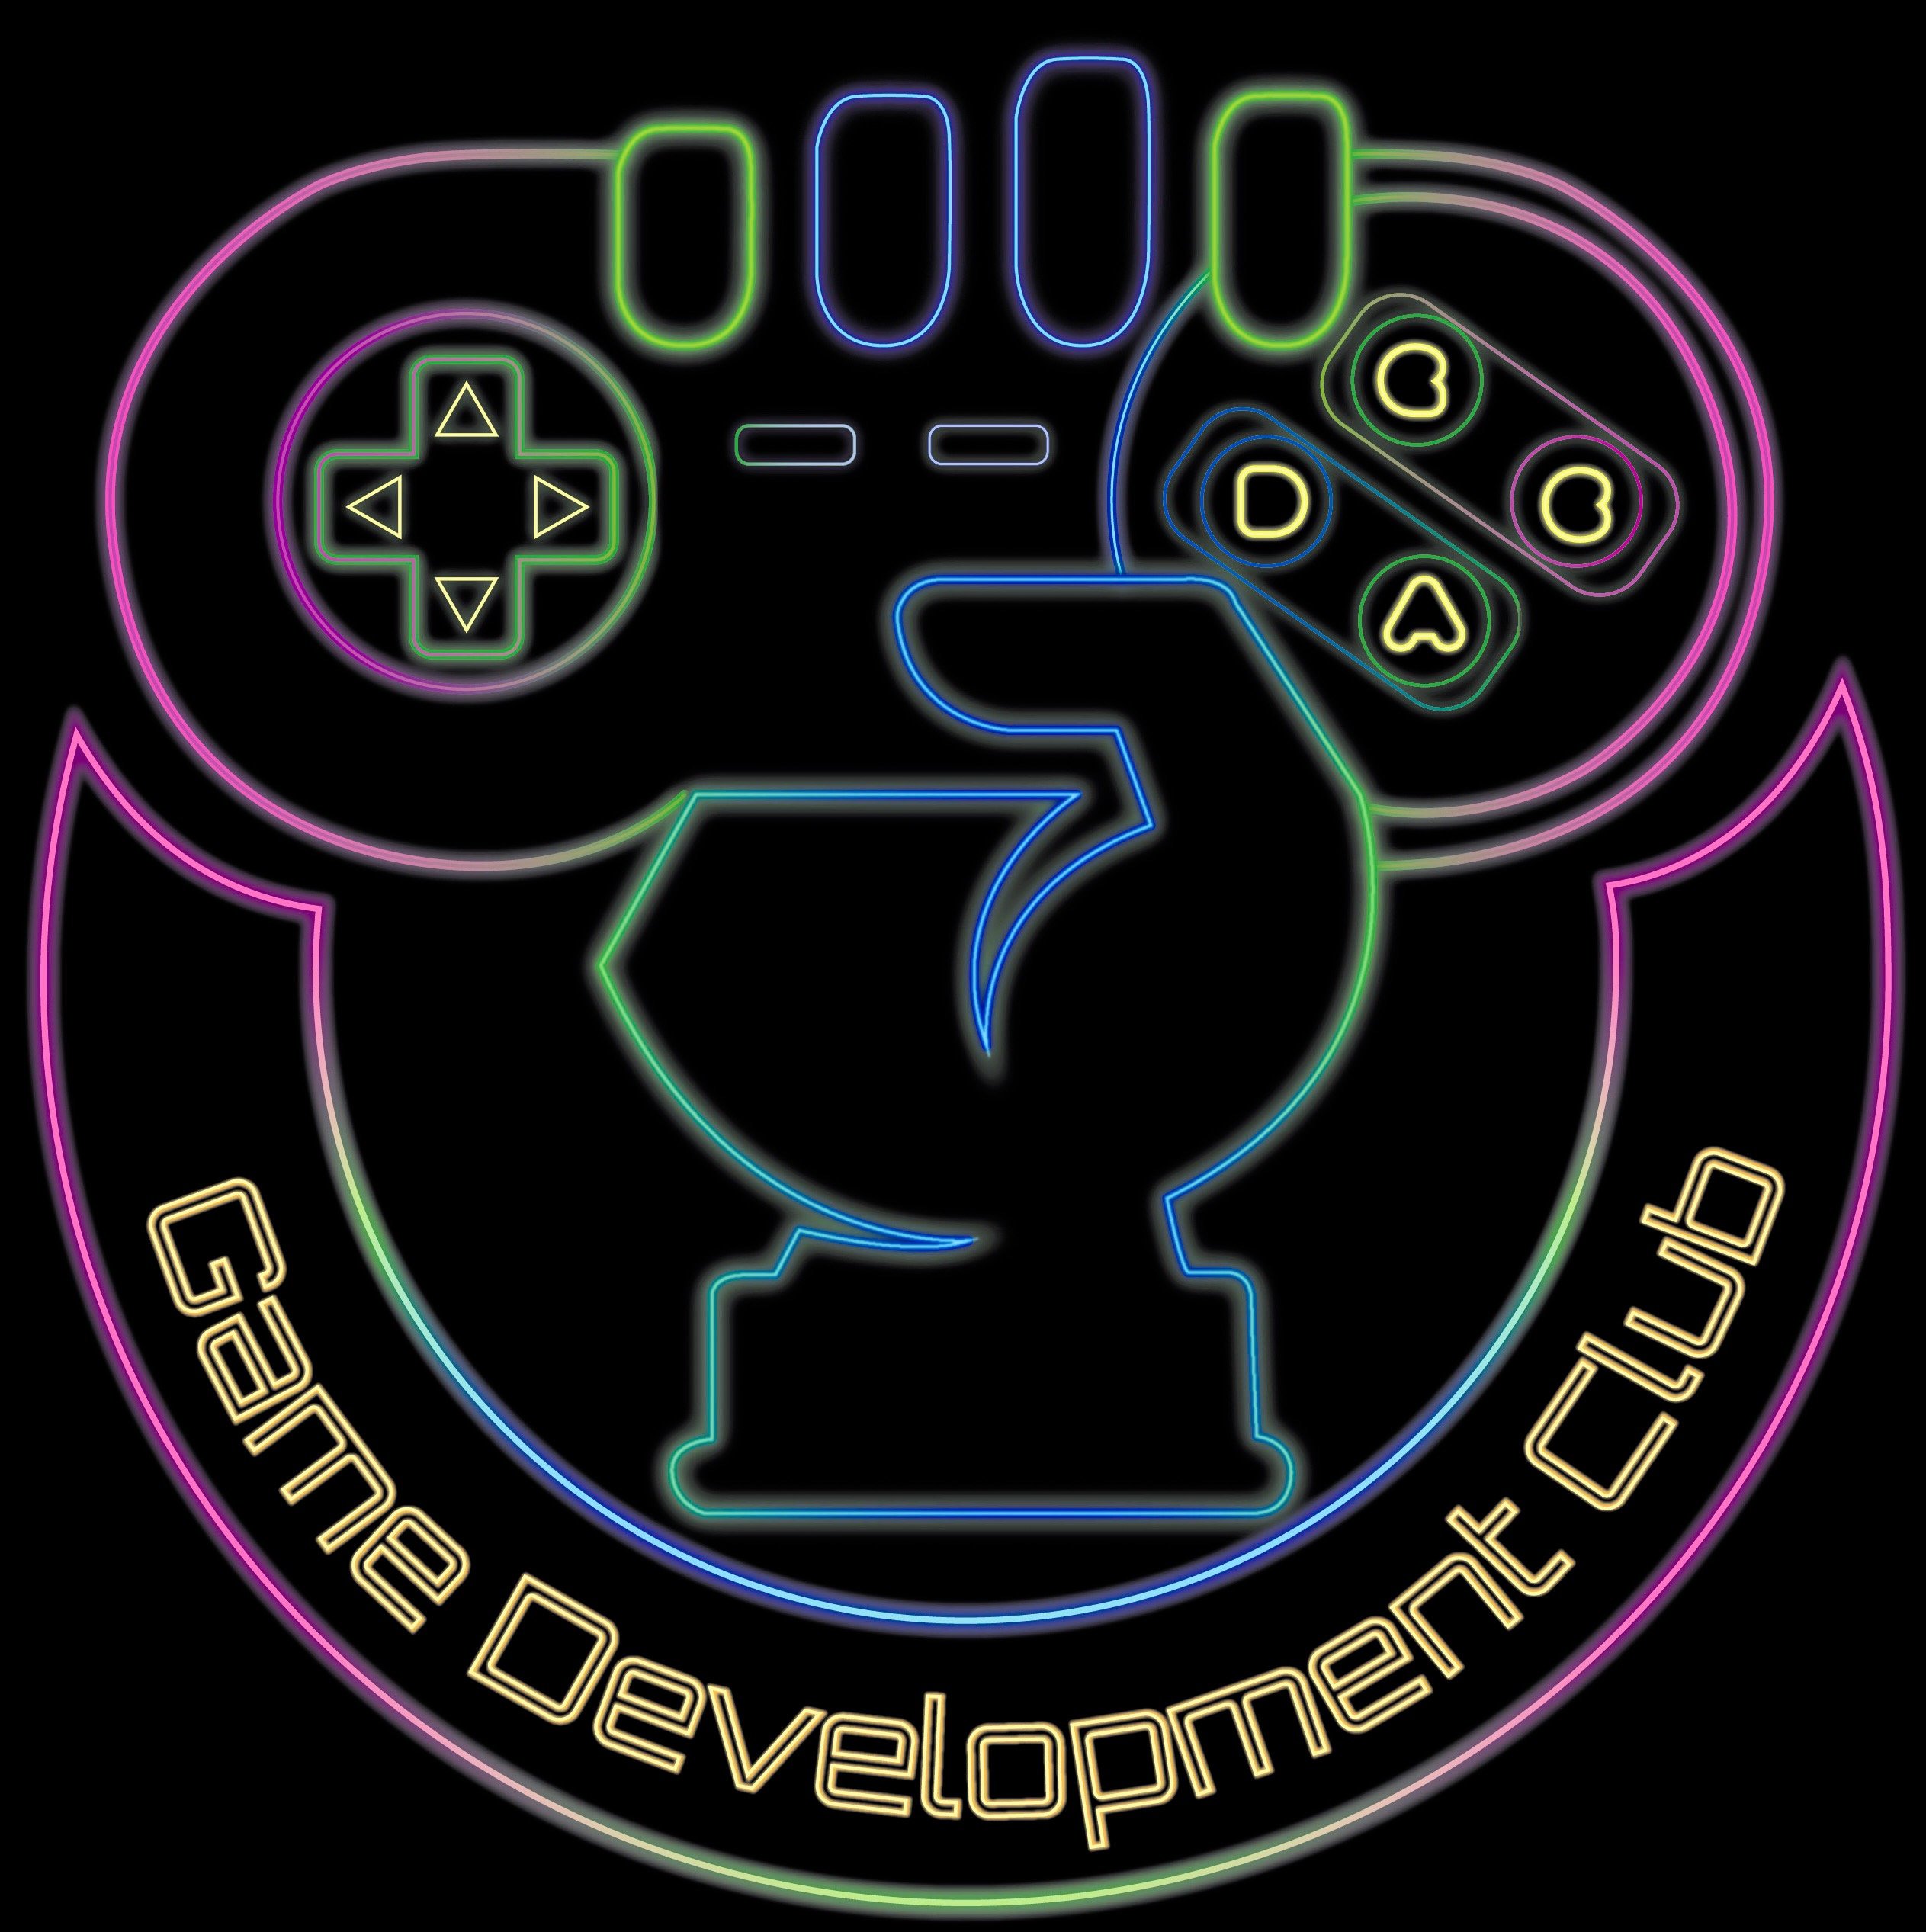 The Official Twitter Page for Johnson C. Smith University first Game Development Club...Looking to network and involve students to the gaming world!